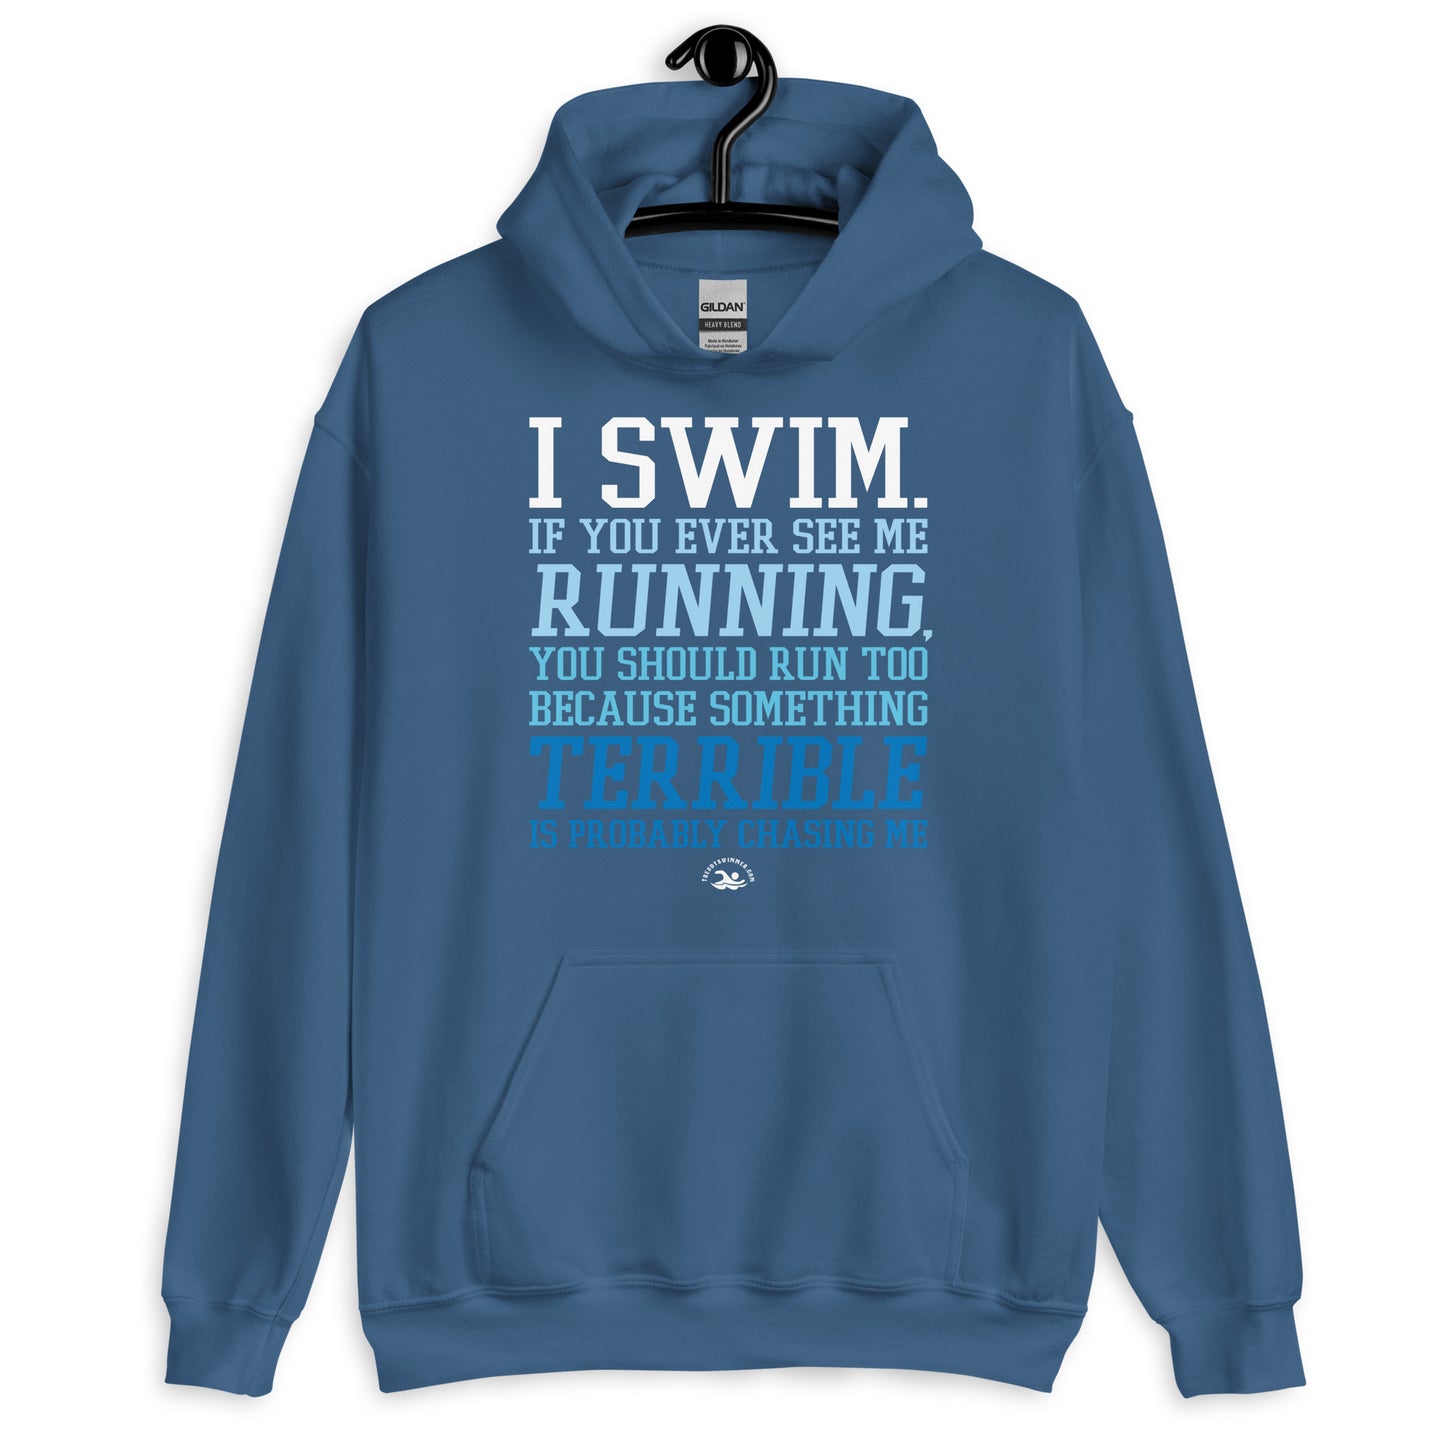 I Swim If You Ever See Me Running Unisex Hoodie - TrendySwimmer